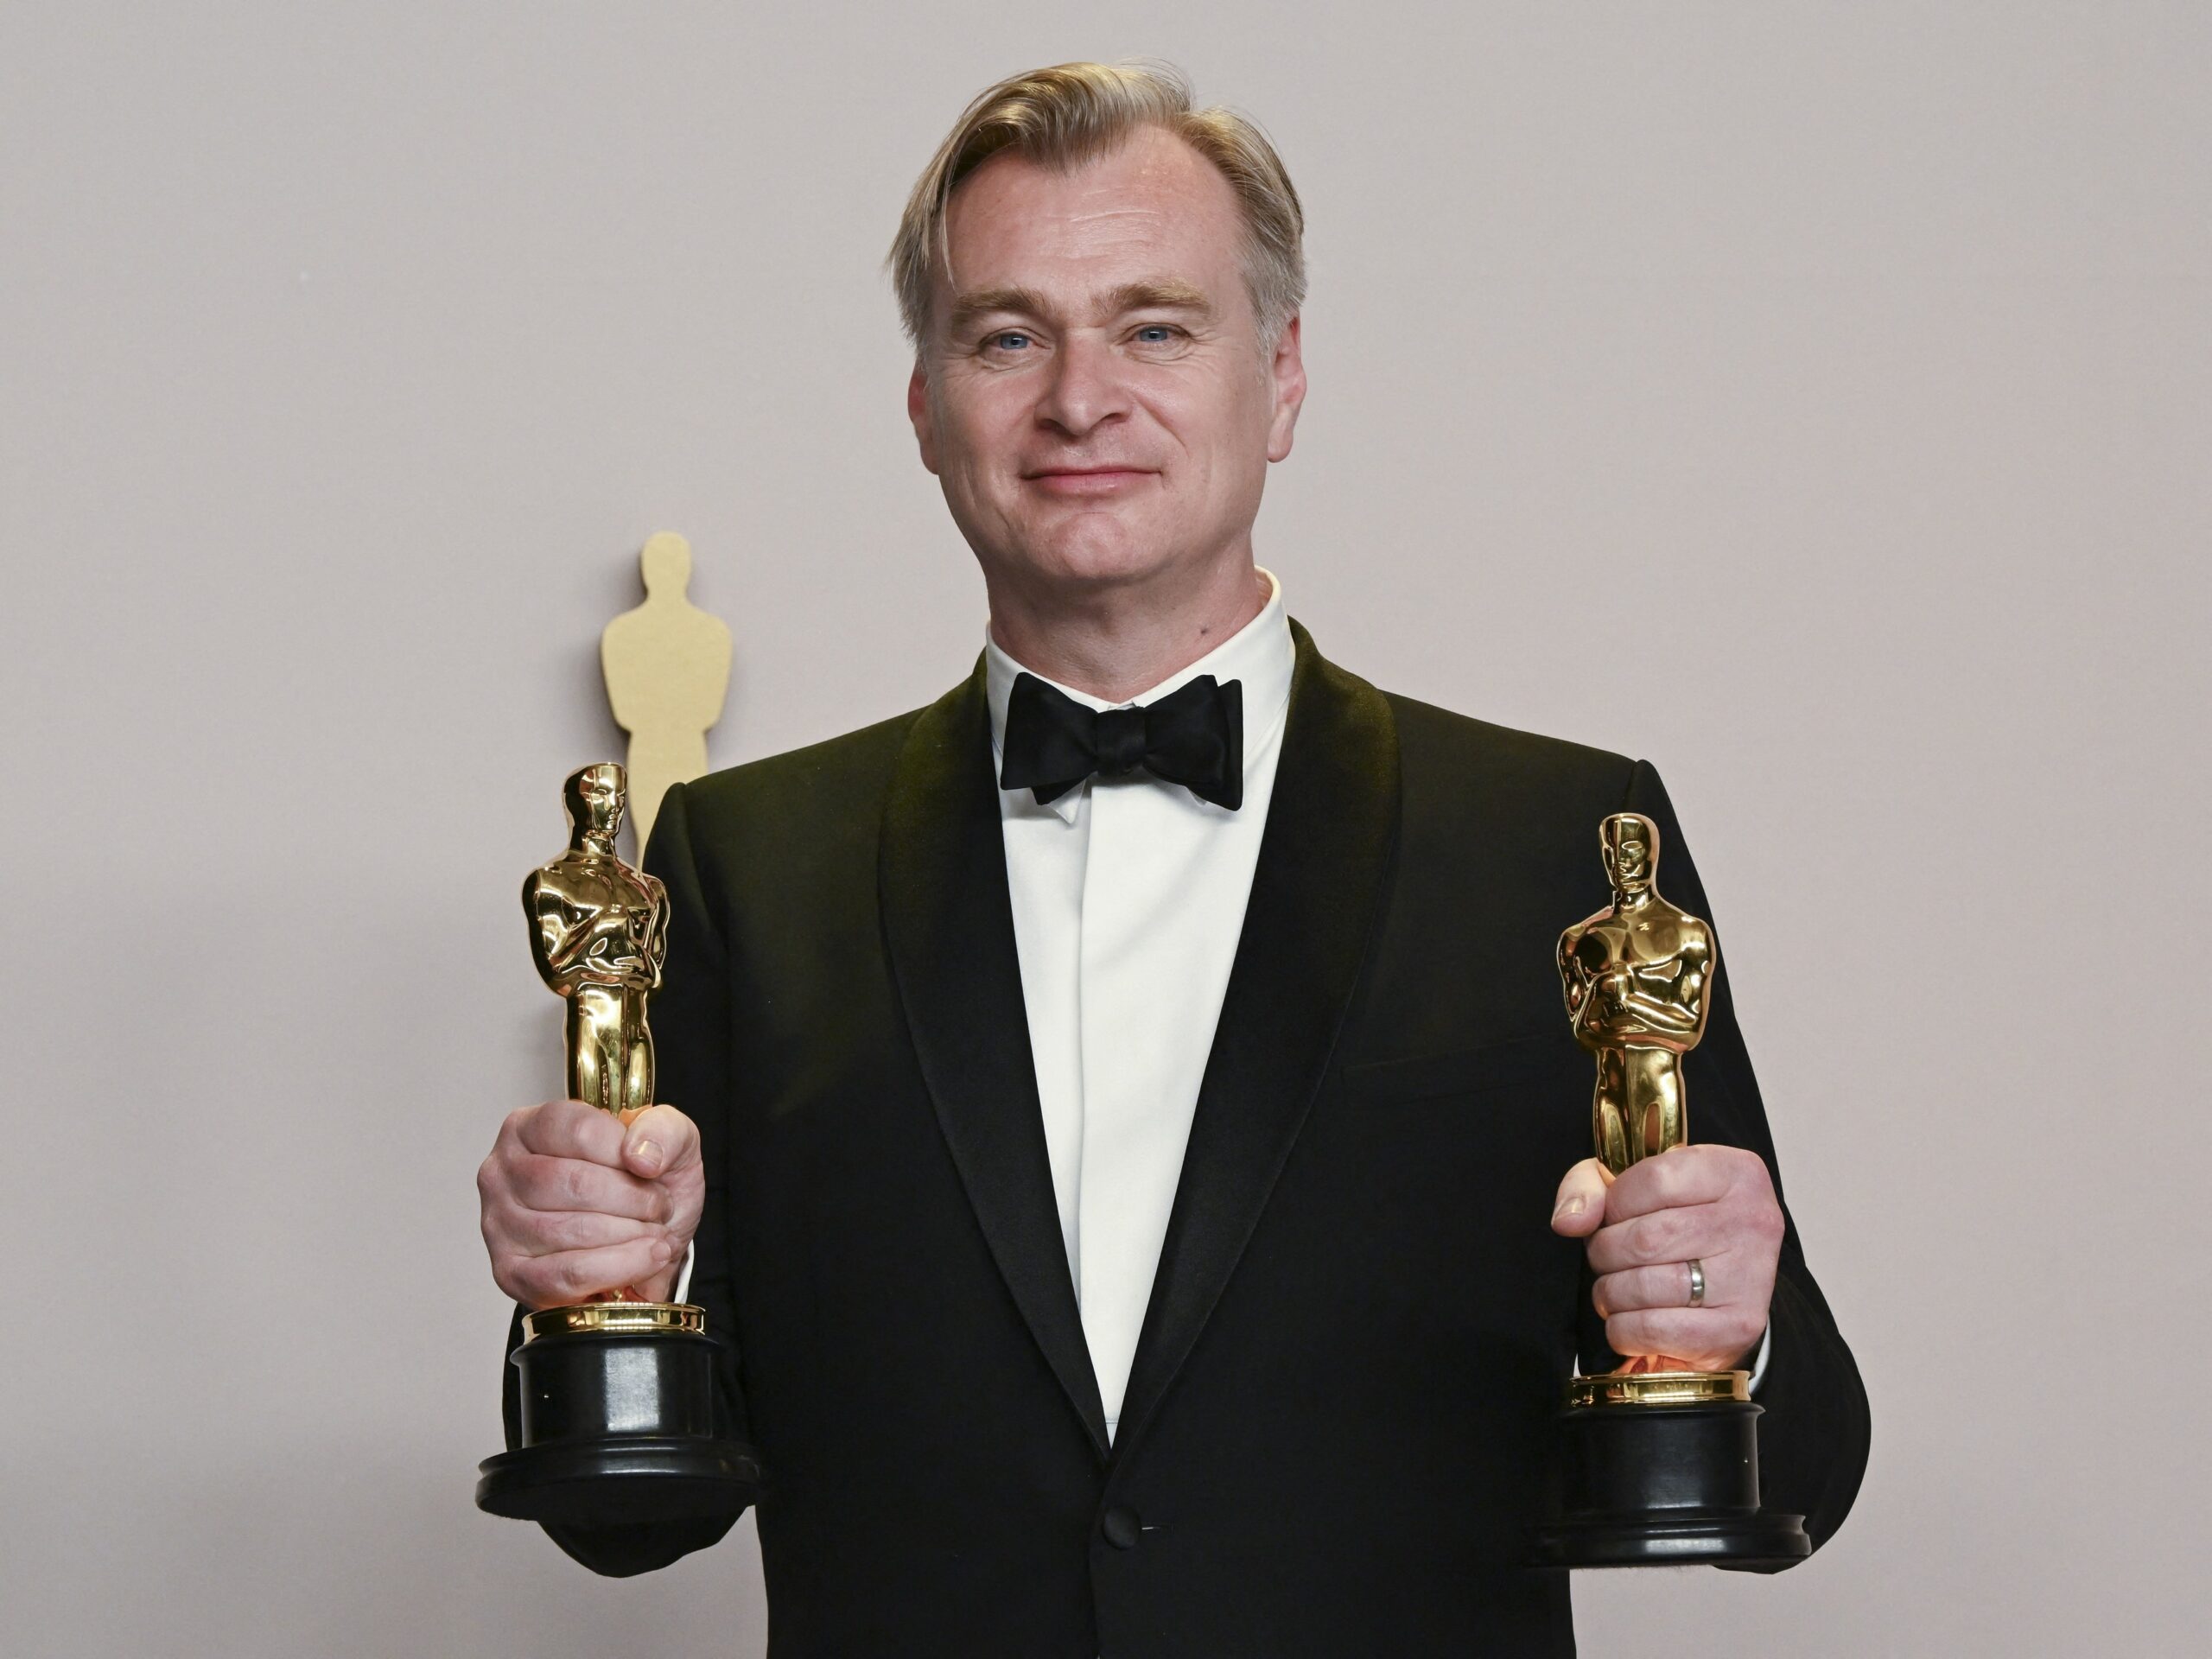 March 10, 2024, Hollywood, California, U.S.: Emma Thomas, Christopher Nolan and Charles Roven in the Press Room during the 96th Academy Awards, presented by the Academy of Motion Picture Arts and Sciences (AMPAS), at the Dolby Theatre in Hollywood.
10 Mar 2024
Pictured: March 10, 2024, Hollywood, California, U.S.: Christopher Nolan in the Press Room during the 96th Academy Awards, presented by the Academy of Motion Picture Arts and Sciences (AMPAS), at the Dolby Theatre in Hollywood.,Image: 856000417, License: Rights-managed, Restrictions: NO Argentina, Australia, Bolivia, Brazil, Chile, Colombia, Finland, France, Georgia, Hungary, Japan, Mexico, Netherlands, New Zealand, Poland, Romania, Russia, South Africa, Uruguay, Model Release: no, Credit line: ZUMAPRESS.com / MEGA / The Mega Agency / Profimedia